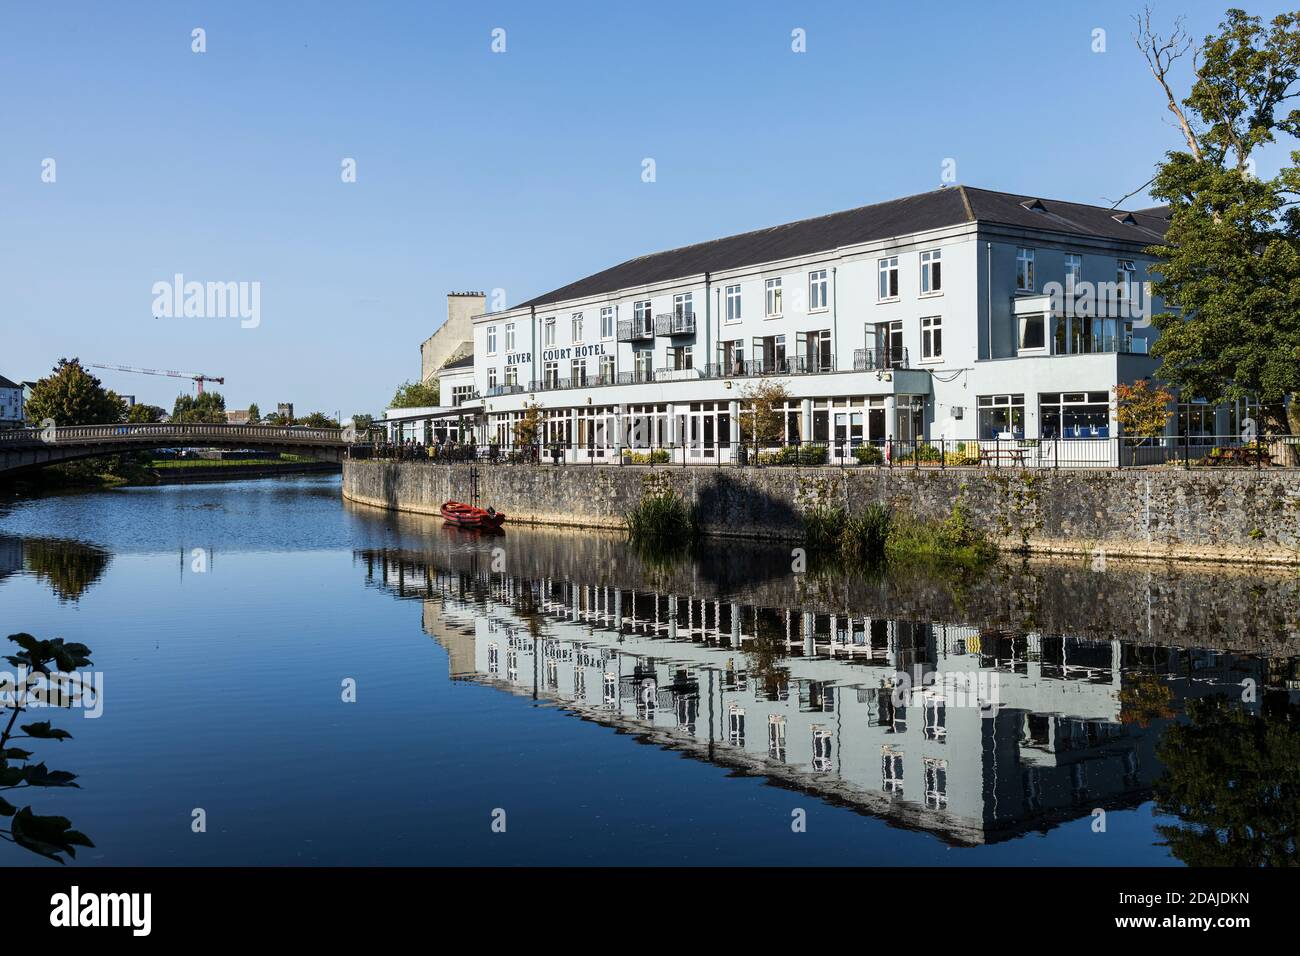 River Court Hotel reflected in the river Nore in Kilkenny, County Kilkenny, Ireland Stock Photo